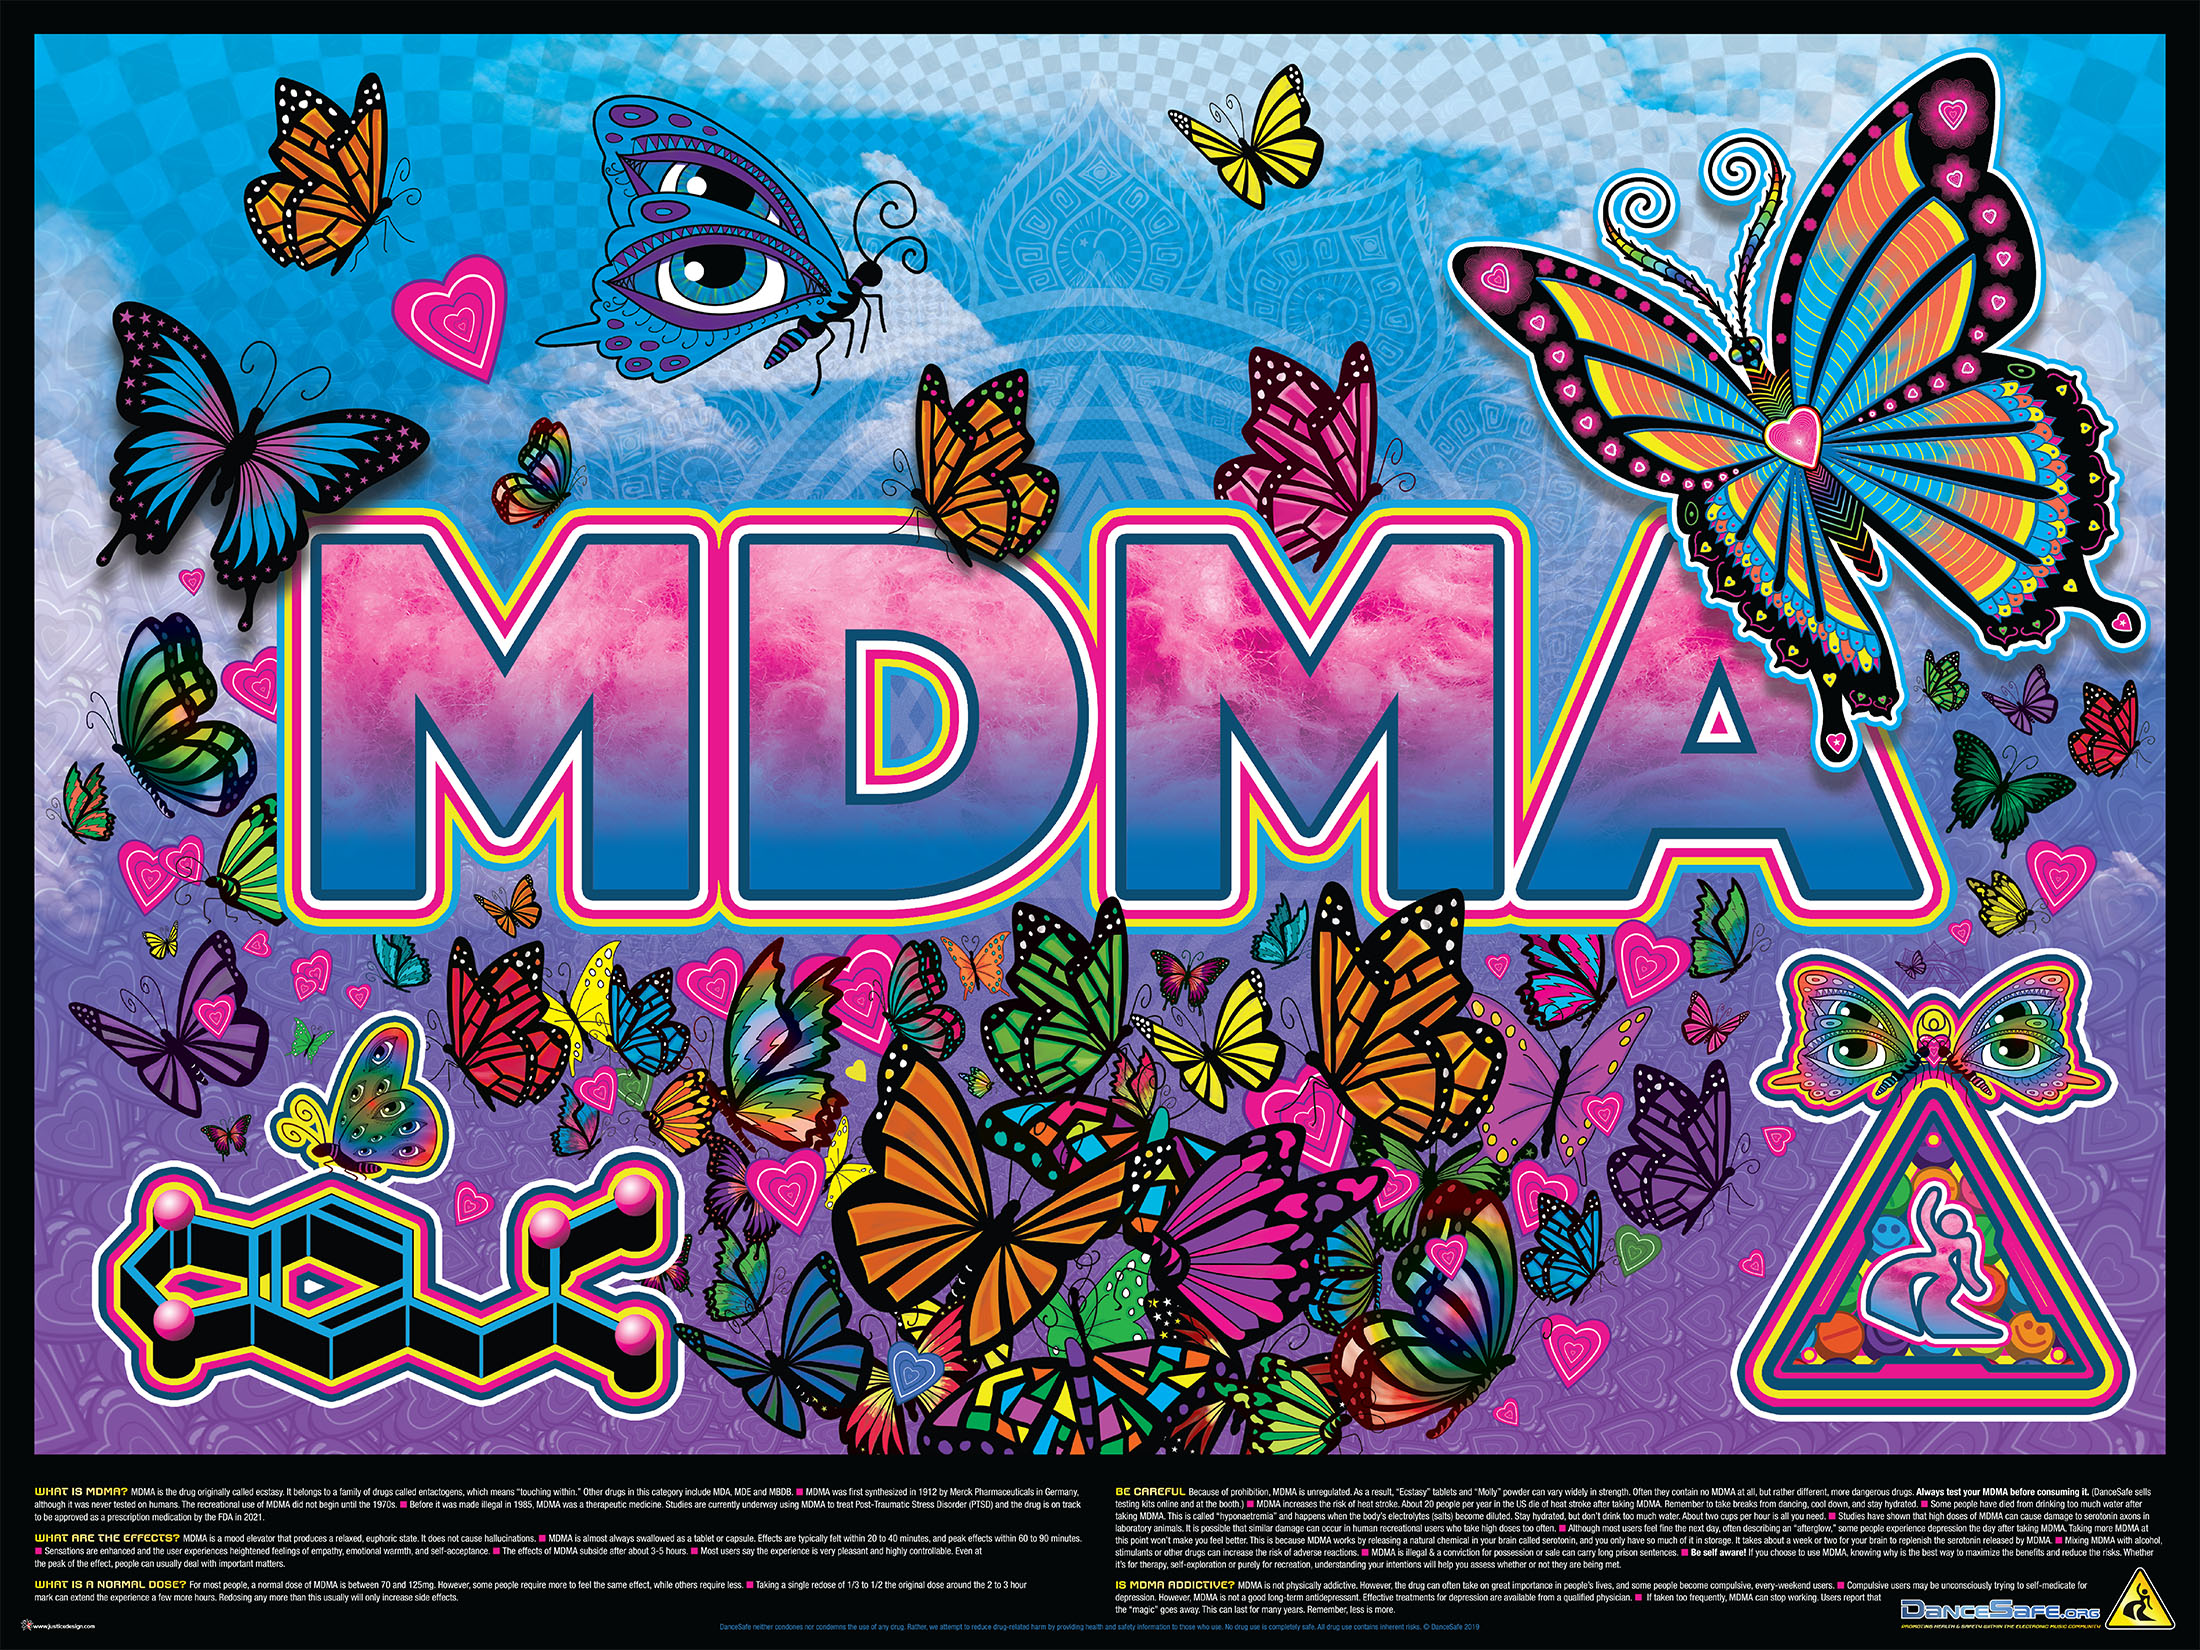 The MDMA educational poster including the DanceSafe MDMA card art on top and drug information about molly on the bottom.